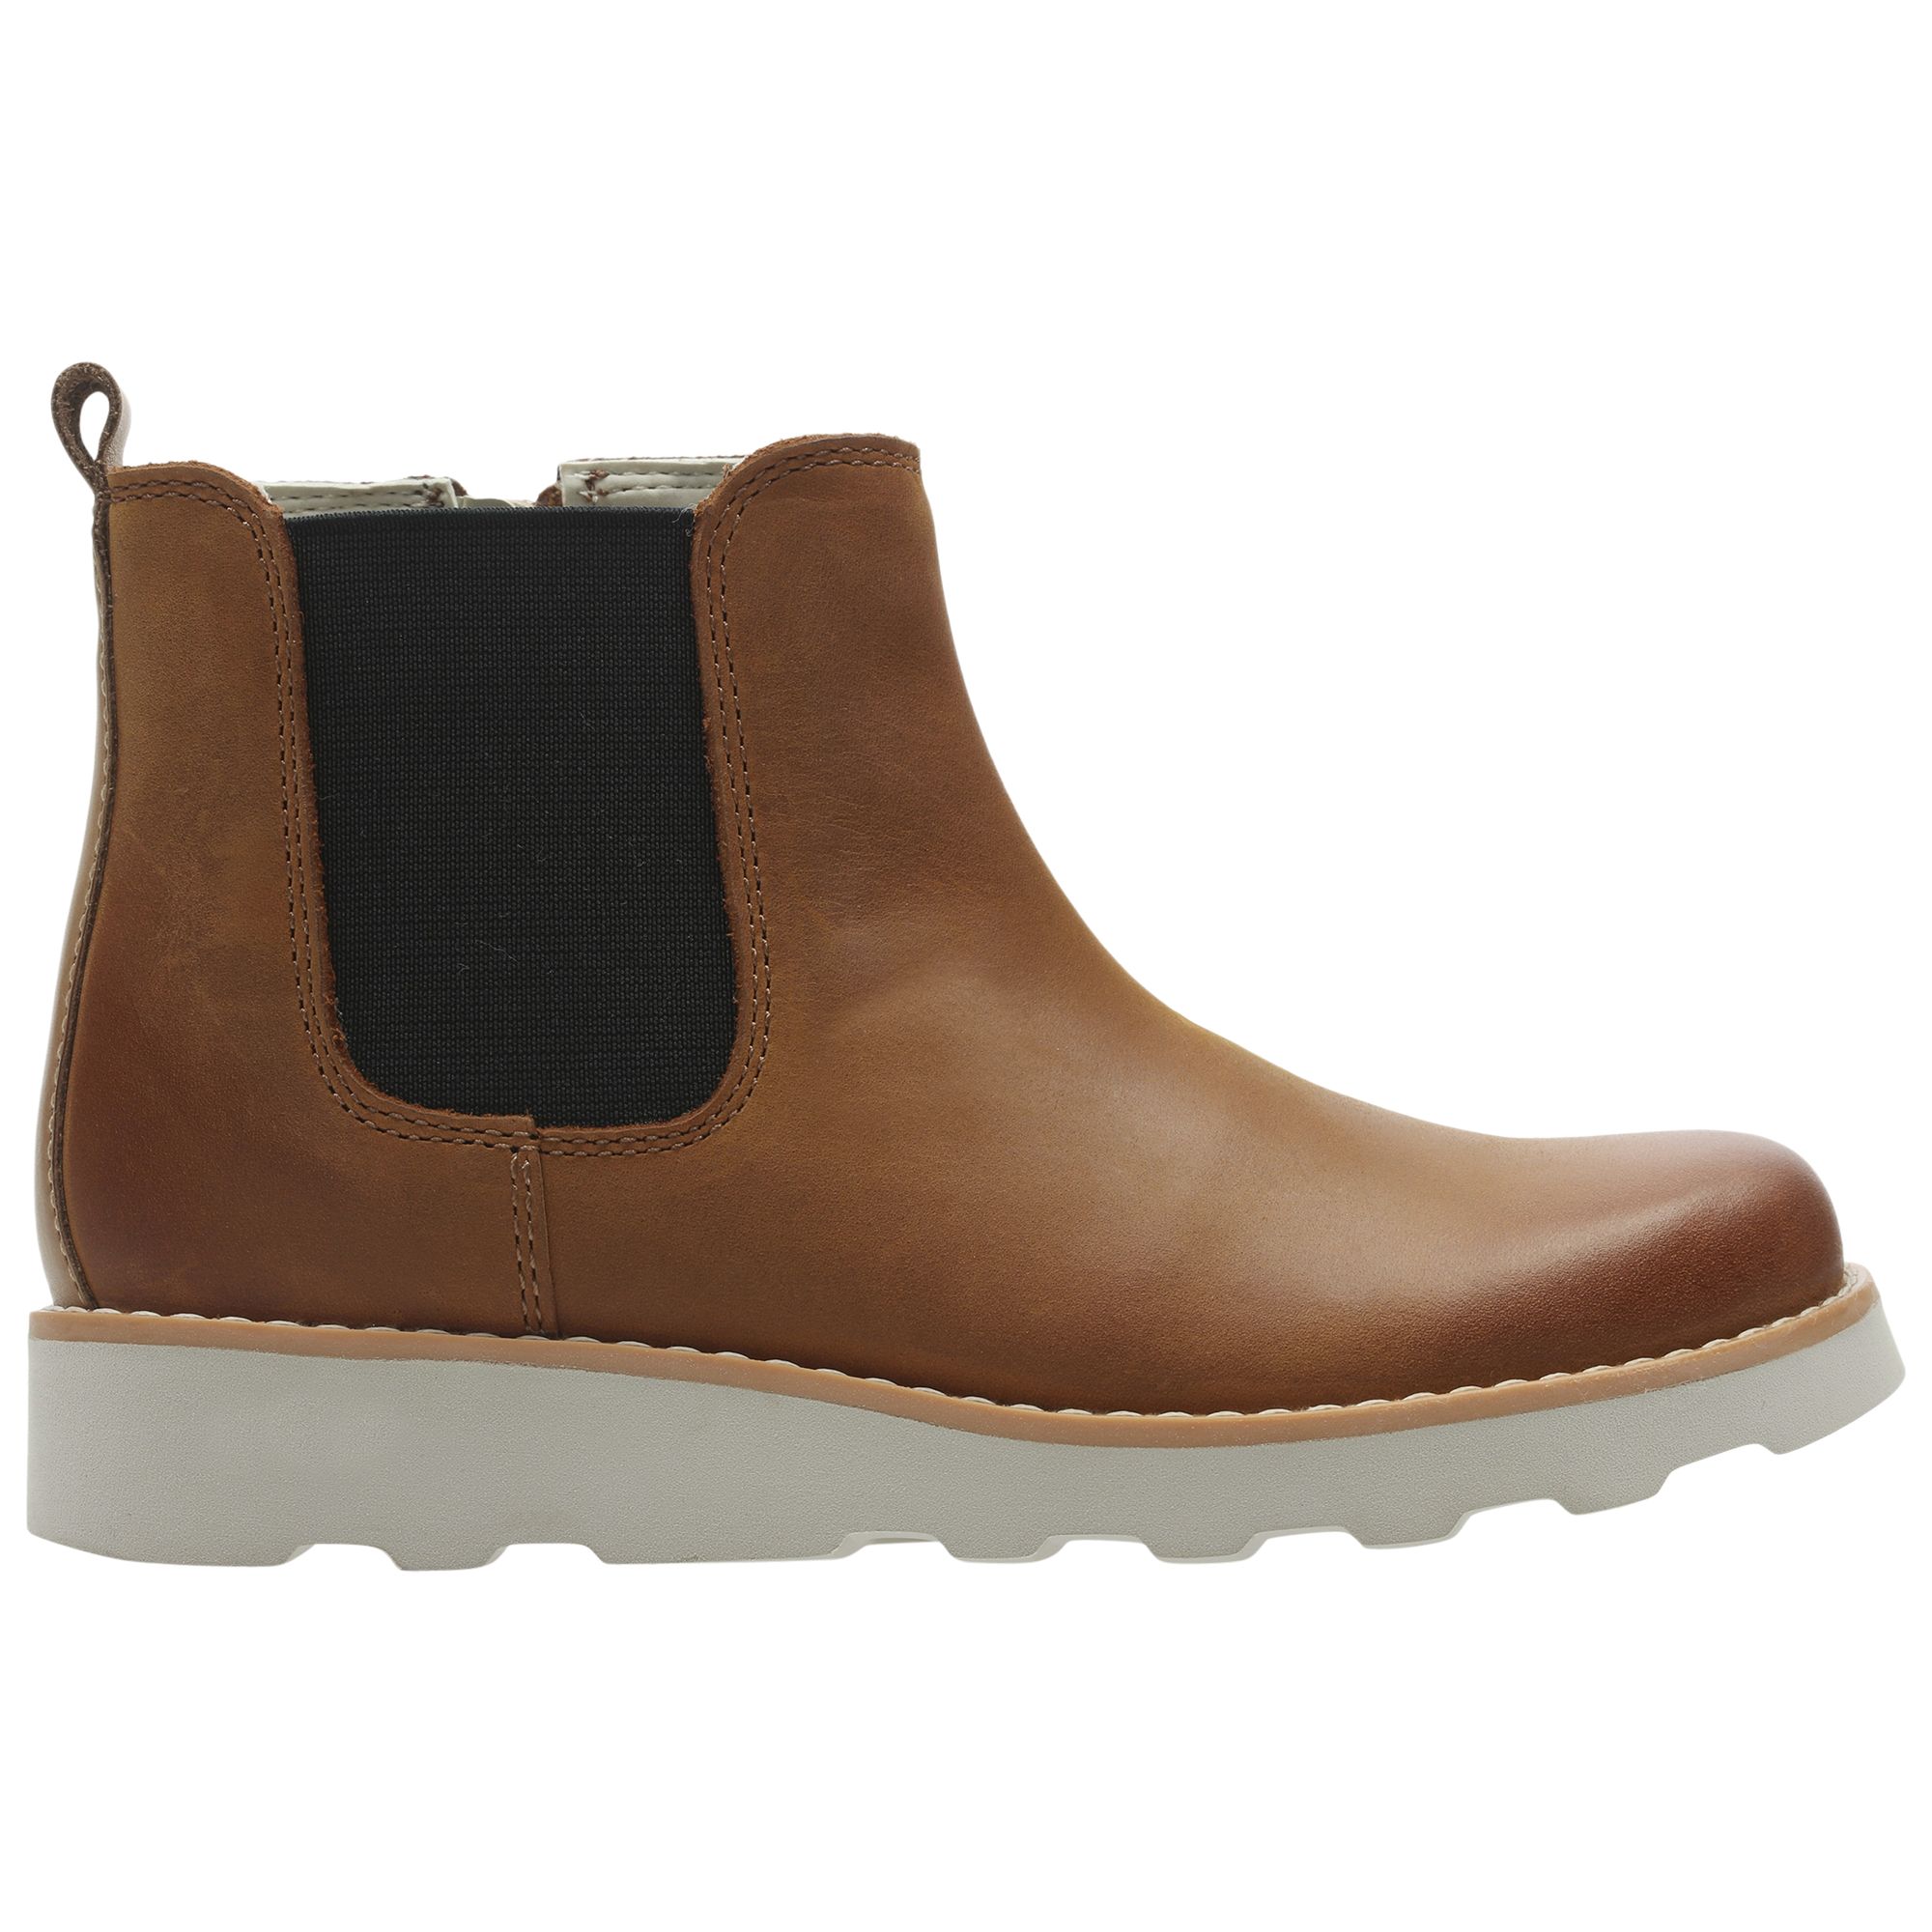 Crown Halo Chelsea Boots, Tan 